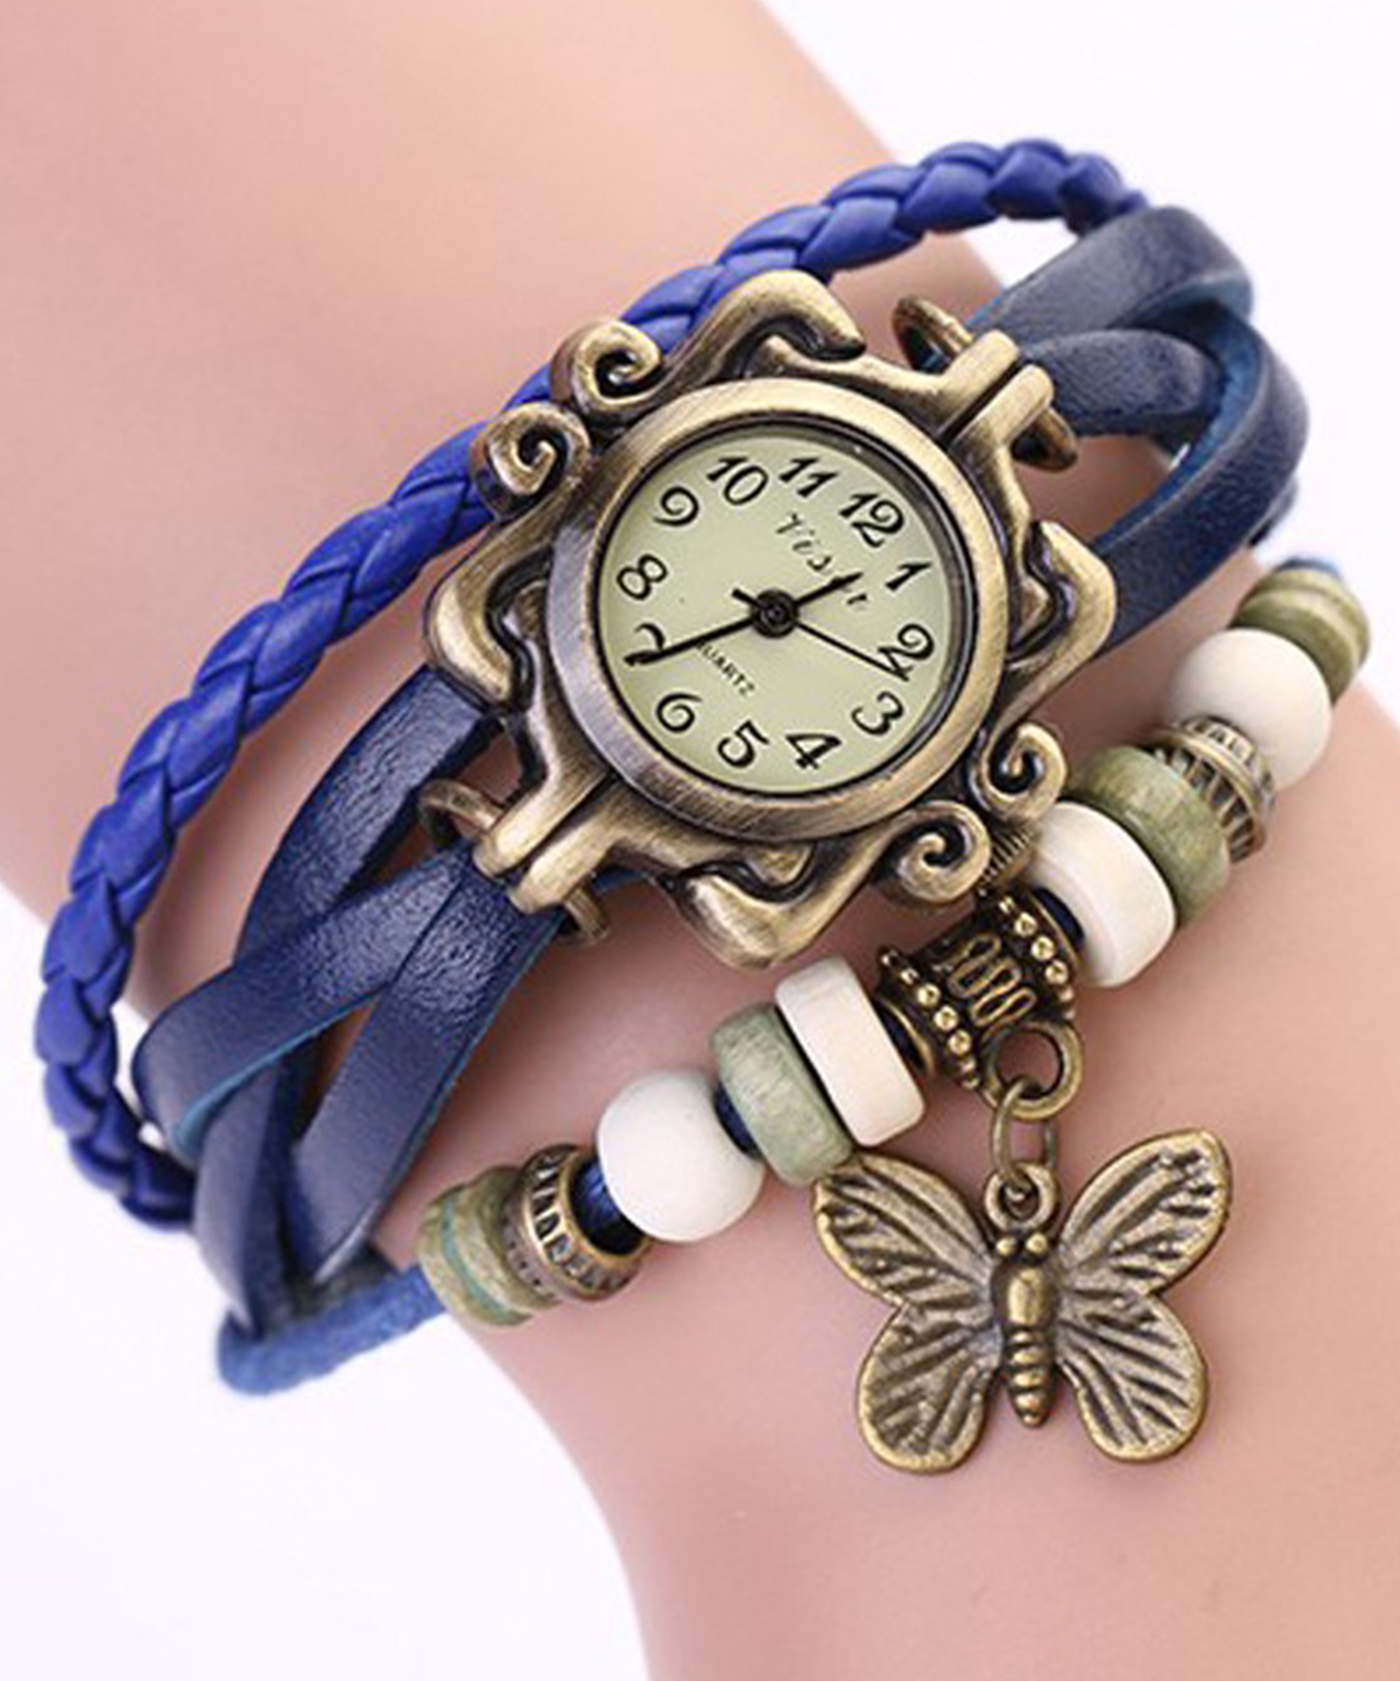 Antique Bracelet Watches What You Want to Look For  LoveToKnow